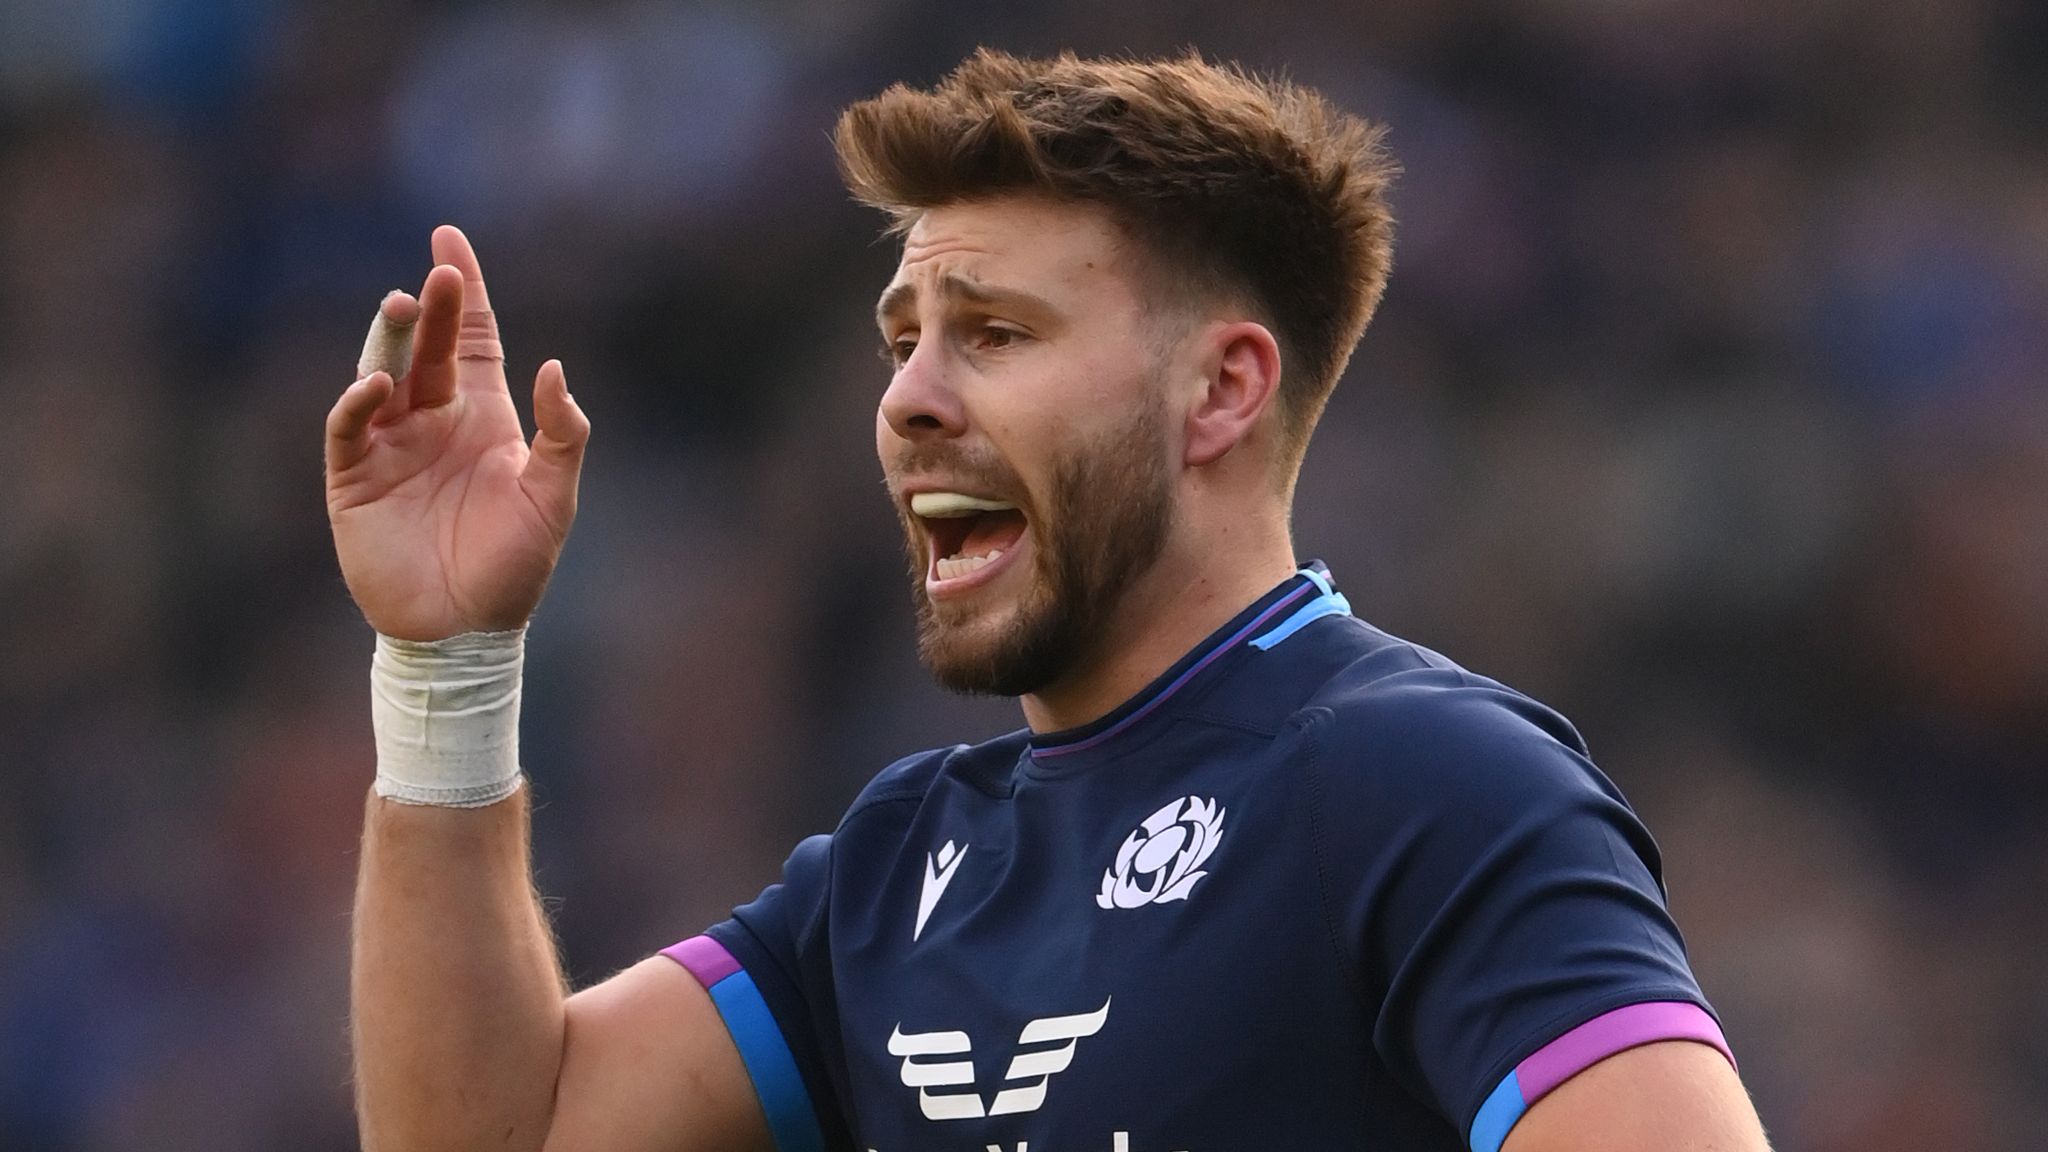 Six Nations Scotland aiming for consistency to deliver at this years Championship, says Ali Price Rugby Union News Sky Sports